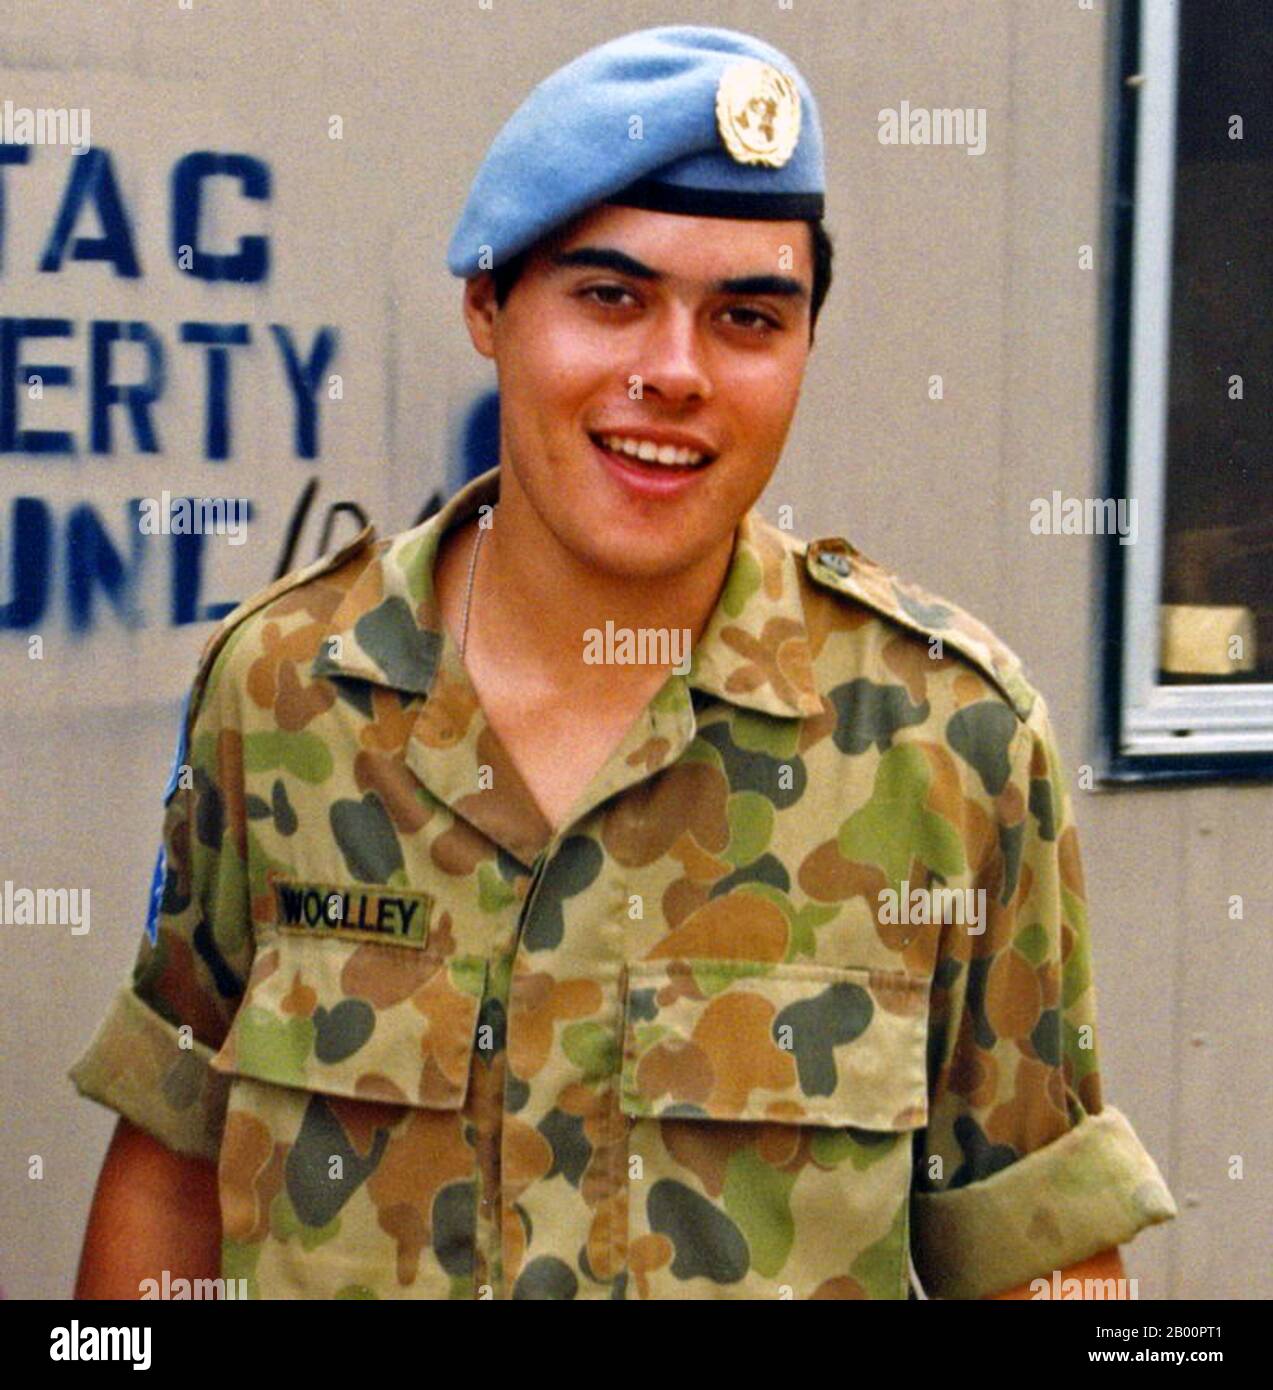 Cambodia: UNTAC (United Nations Transitional Authority in Cambodia) soldier Simon Woolley in UNTAC uniform, 1992-3. Photograph by Simon Woolley, released into the public domain March 2007. Stock Photo